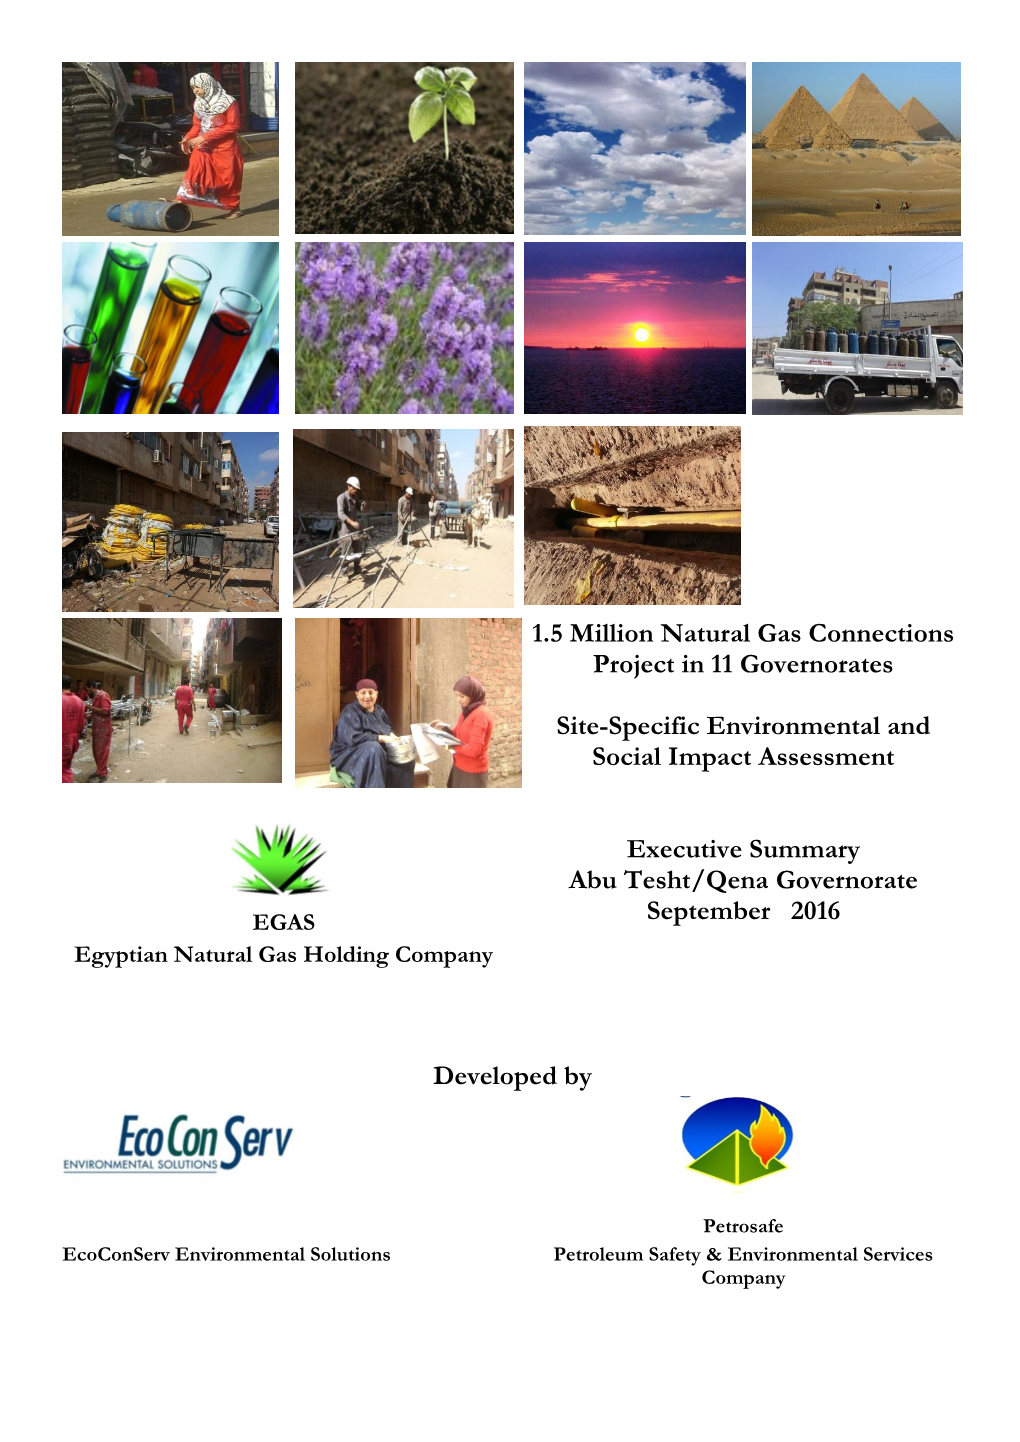 1.5 Million Natural Gas Connections Project in 11 Governorates Site-Specific Environmental and Social Impact Assessment Executi